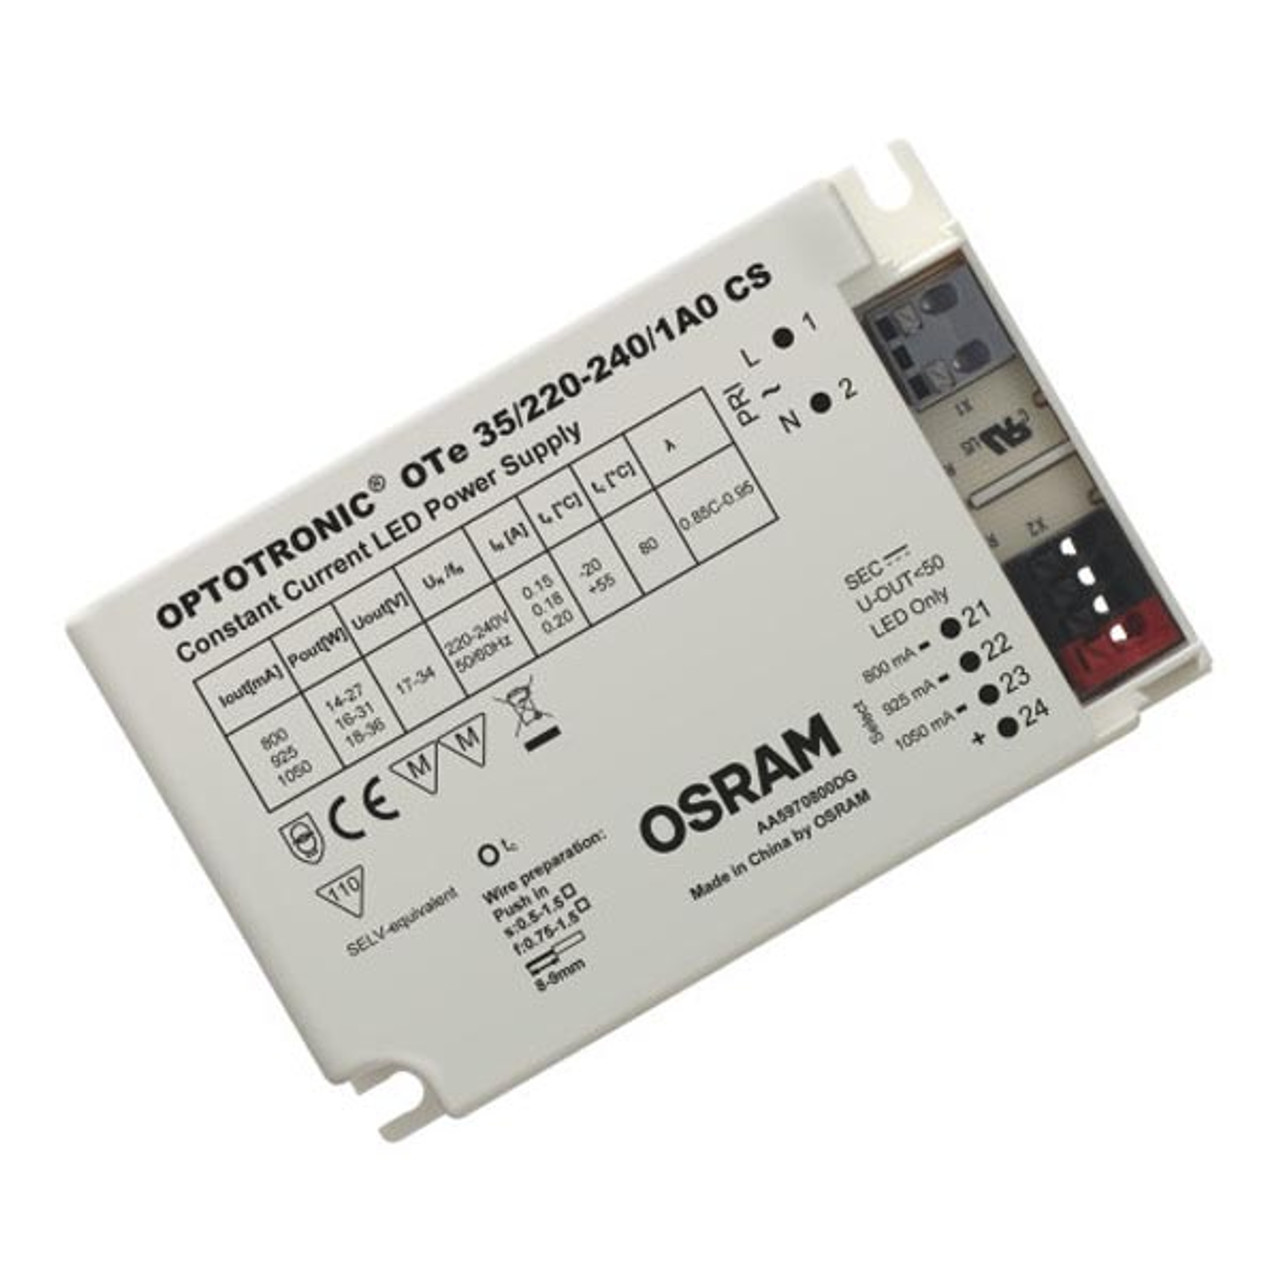 Osram Optotronic 35W 1050mA Constant Current LED Driver